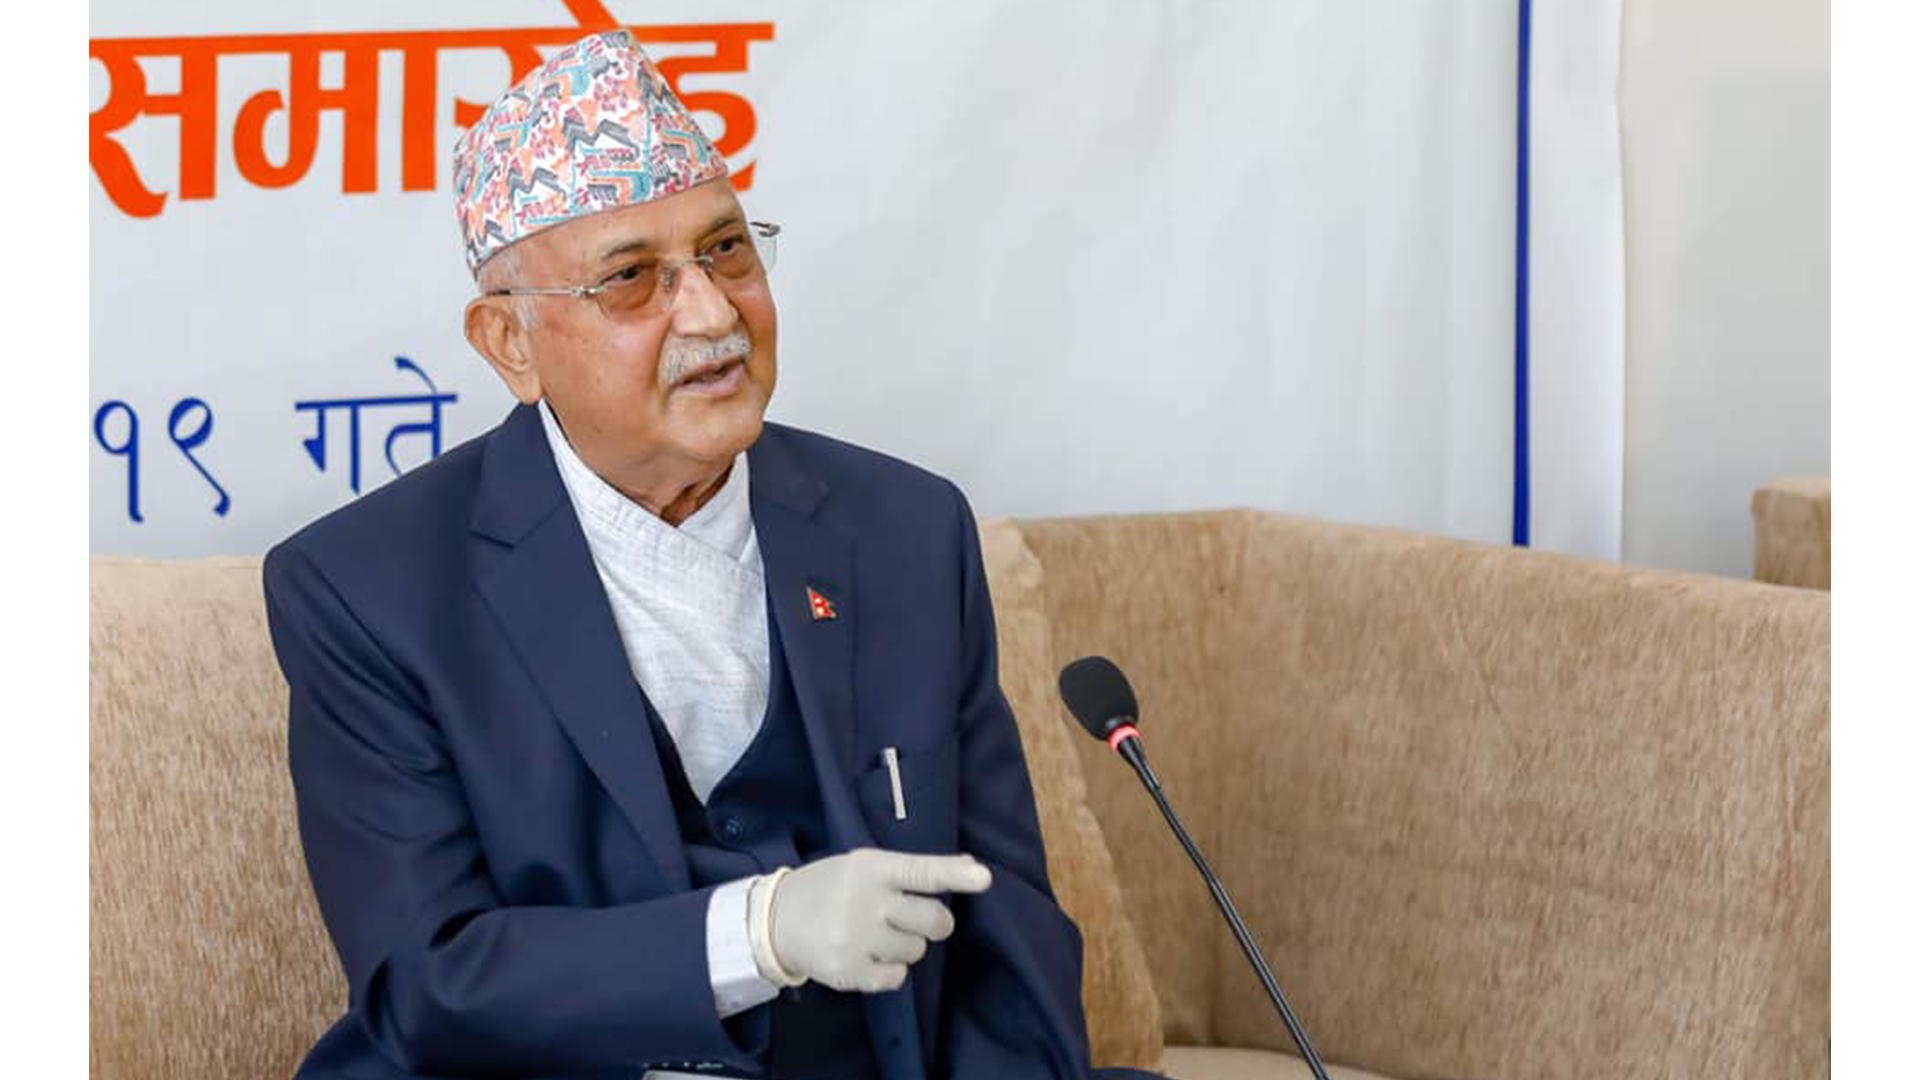 Dissolved House of Representatives cannot be restored under any circumstances: PM Oli